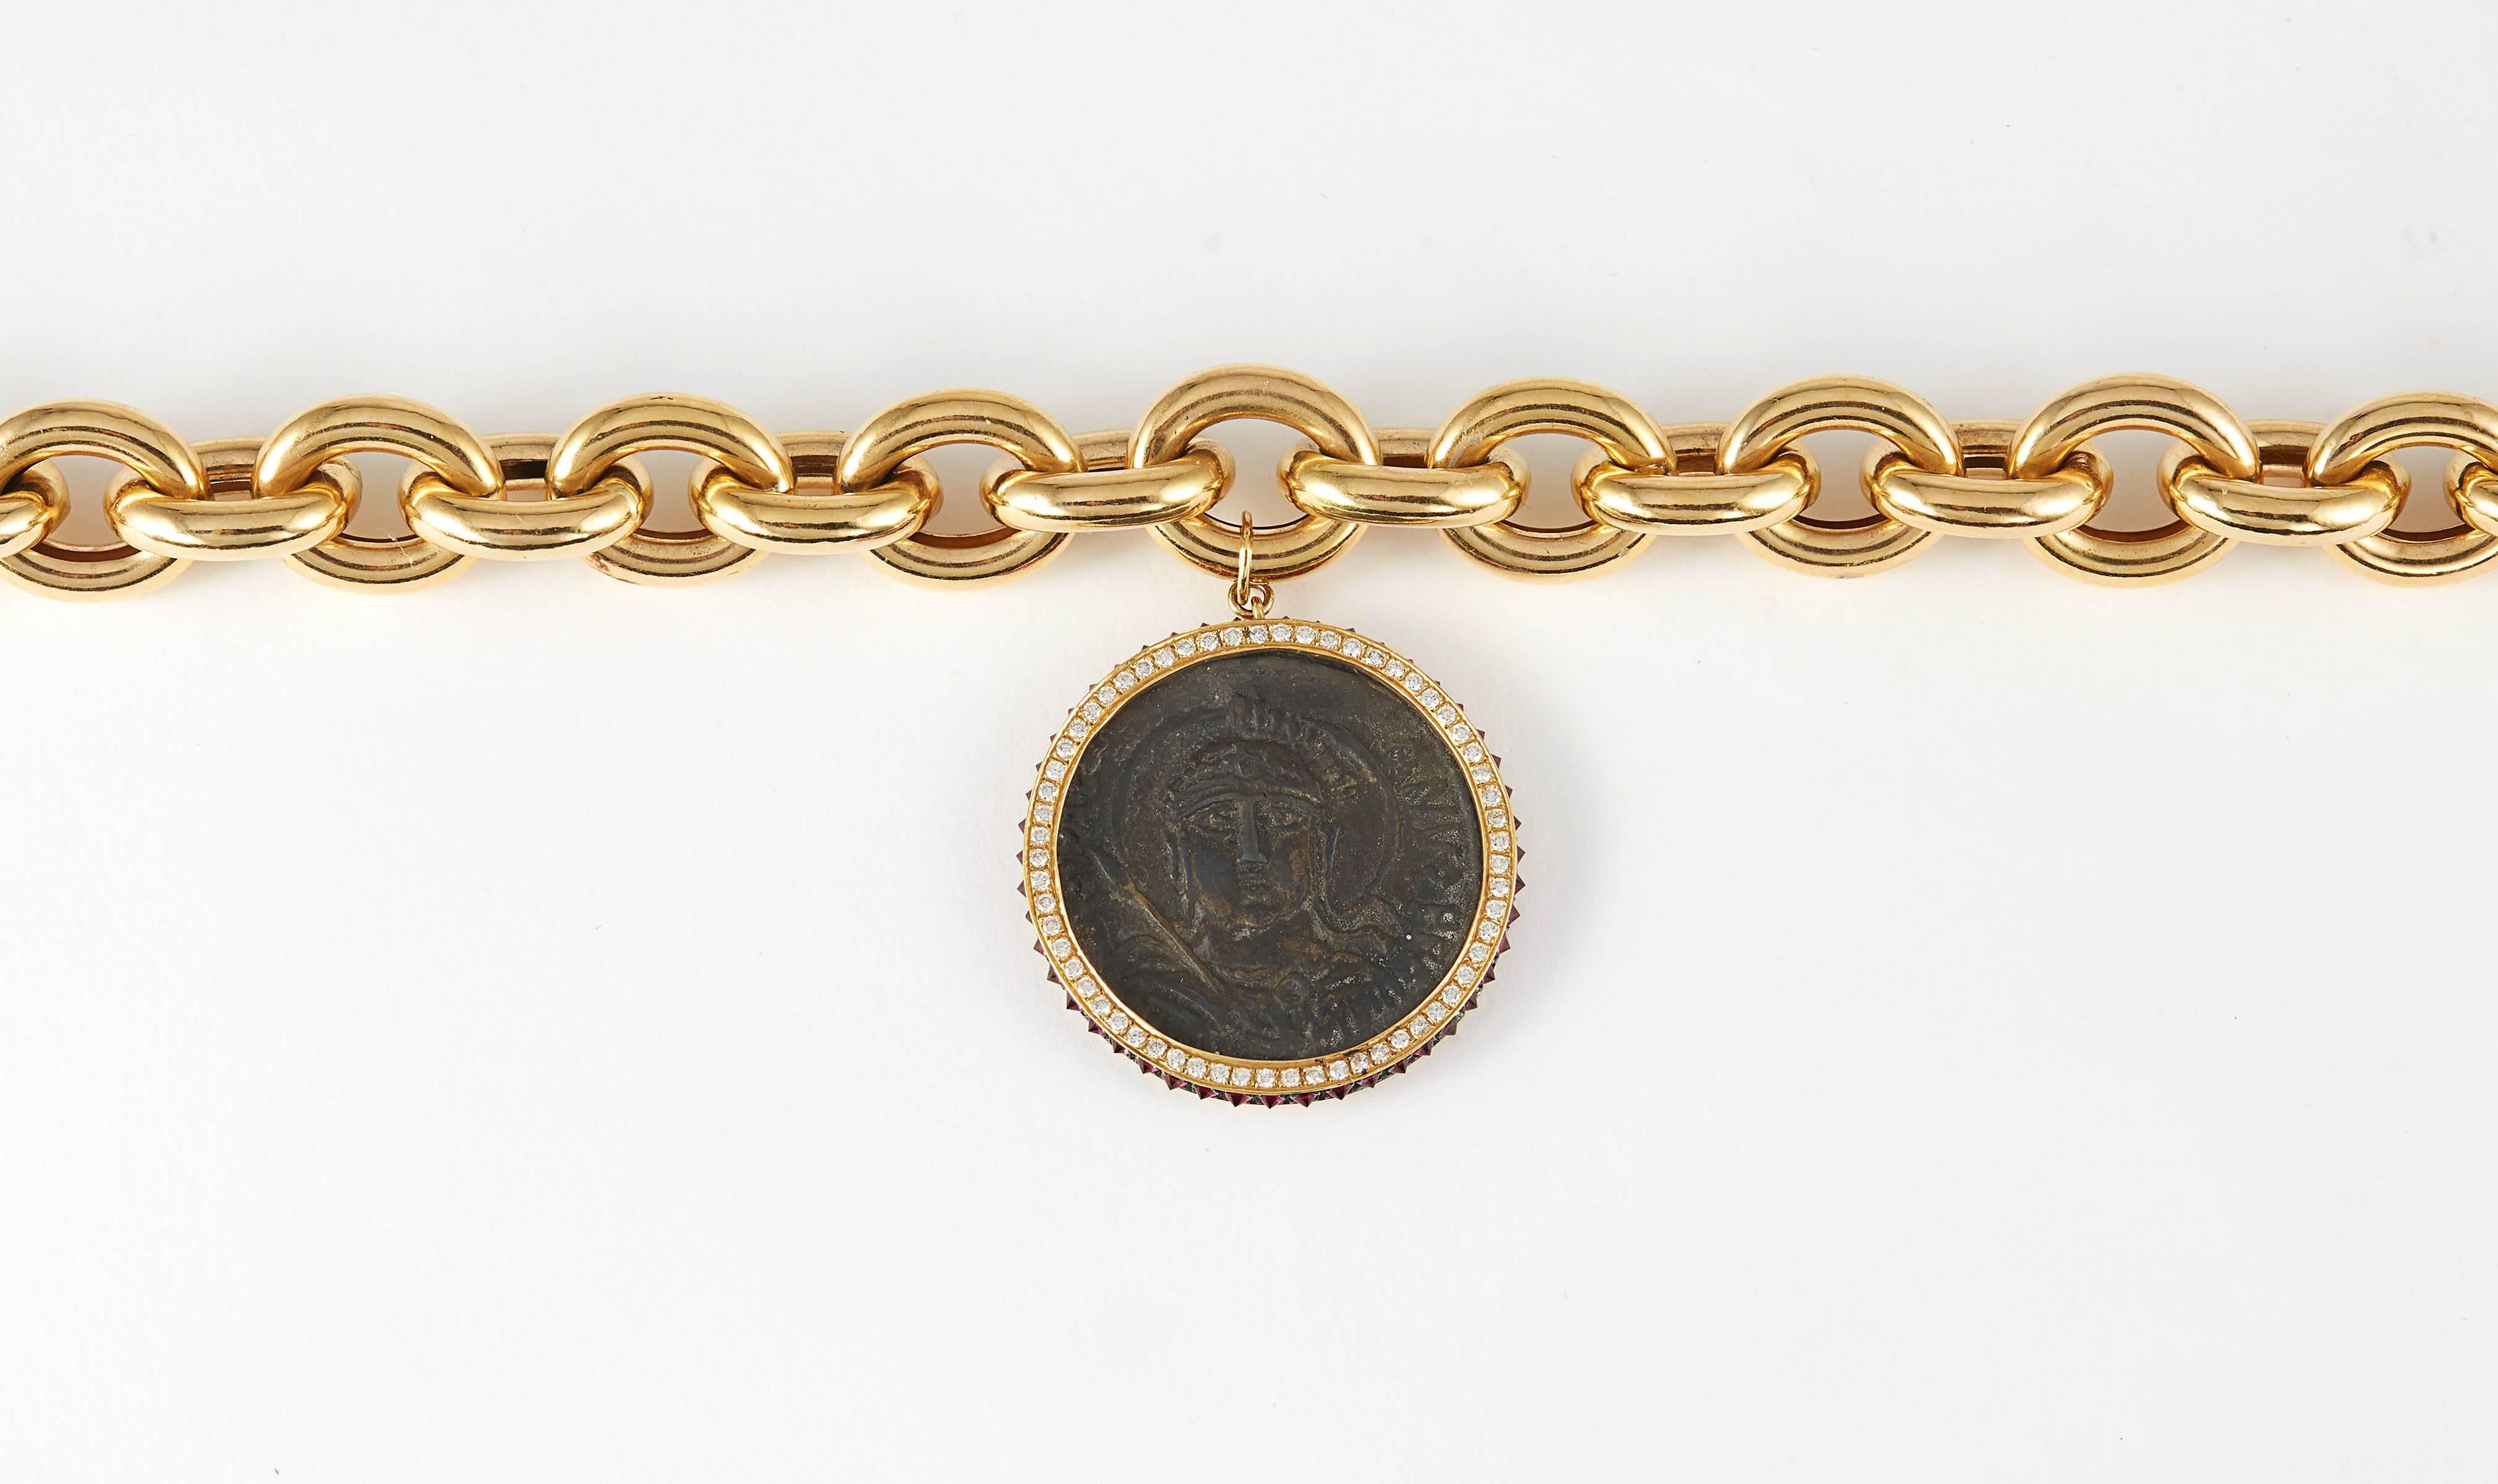 SAM.SAAB Ancient 15th Century Roman Coin in bronze with 1.83ct white diamonds and 1.17ct red spinel accents on an 19inch 18k yellow gold chain.